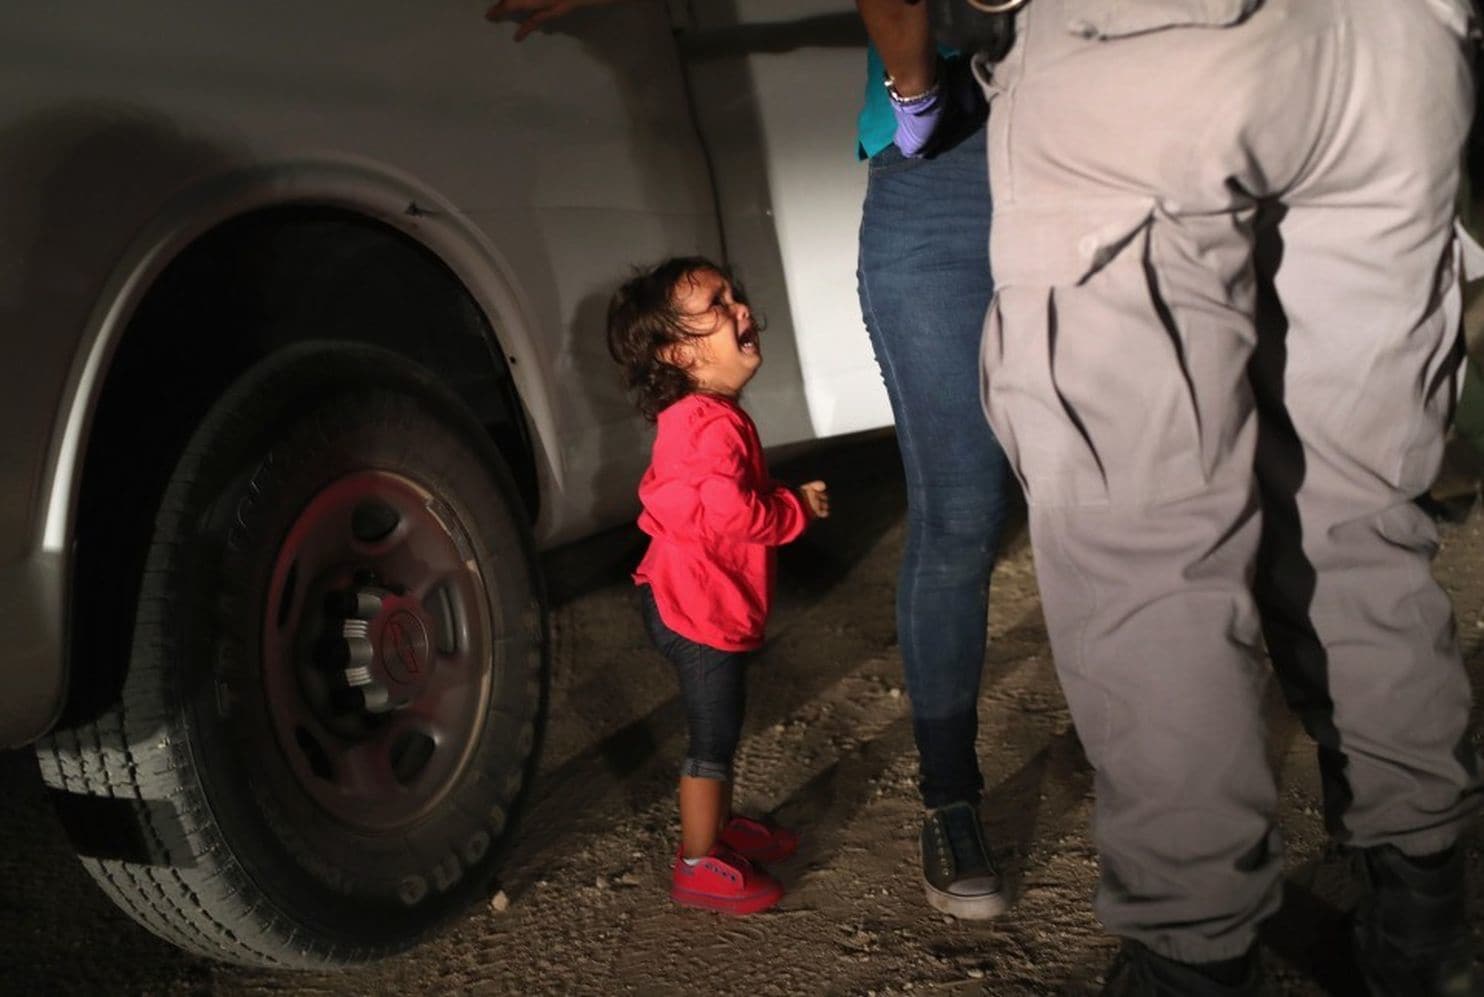 Mother and child being detained by ICE. (image pilfered from the Washington Post)